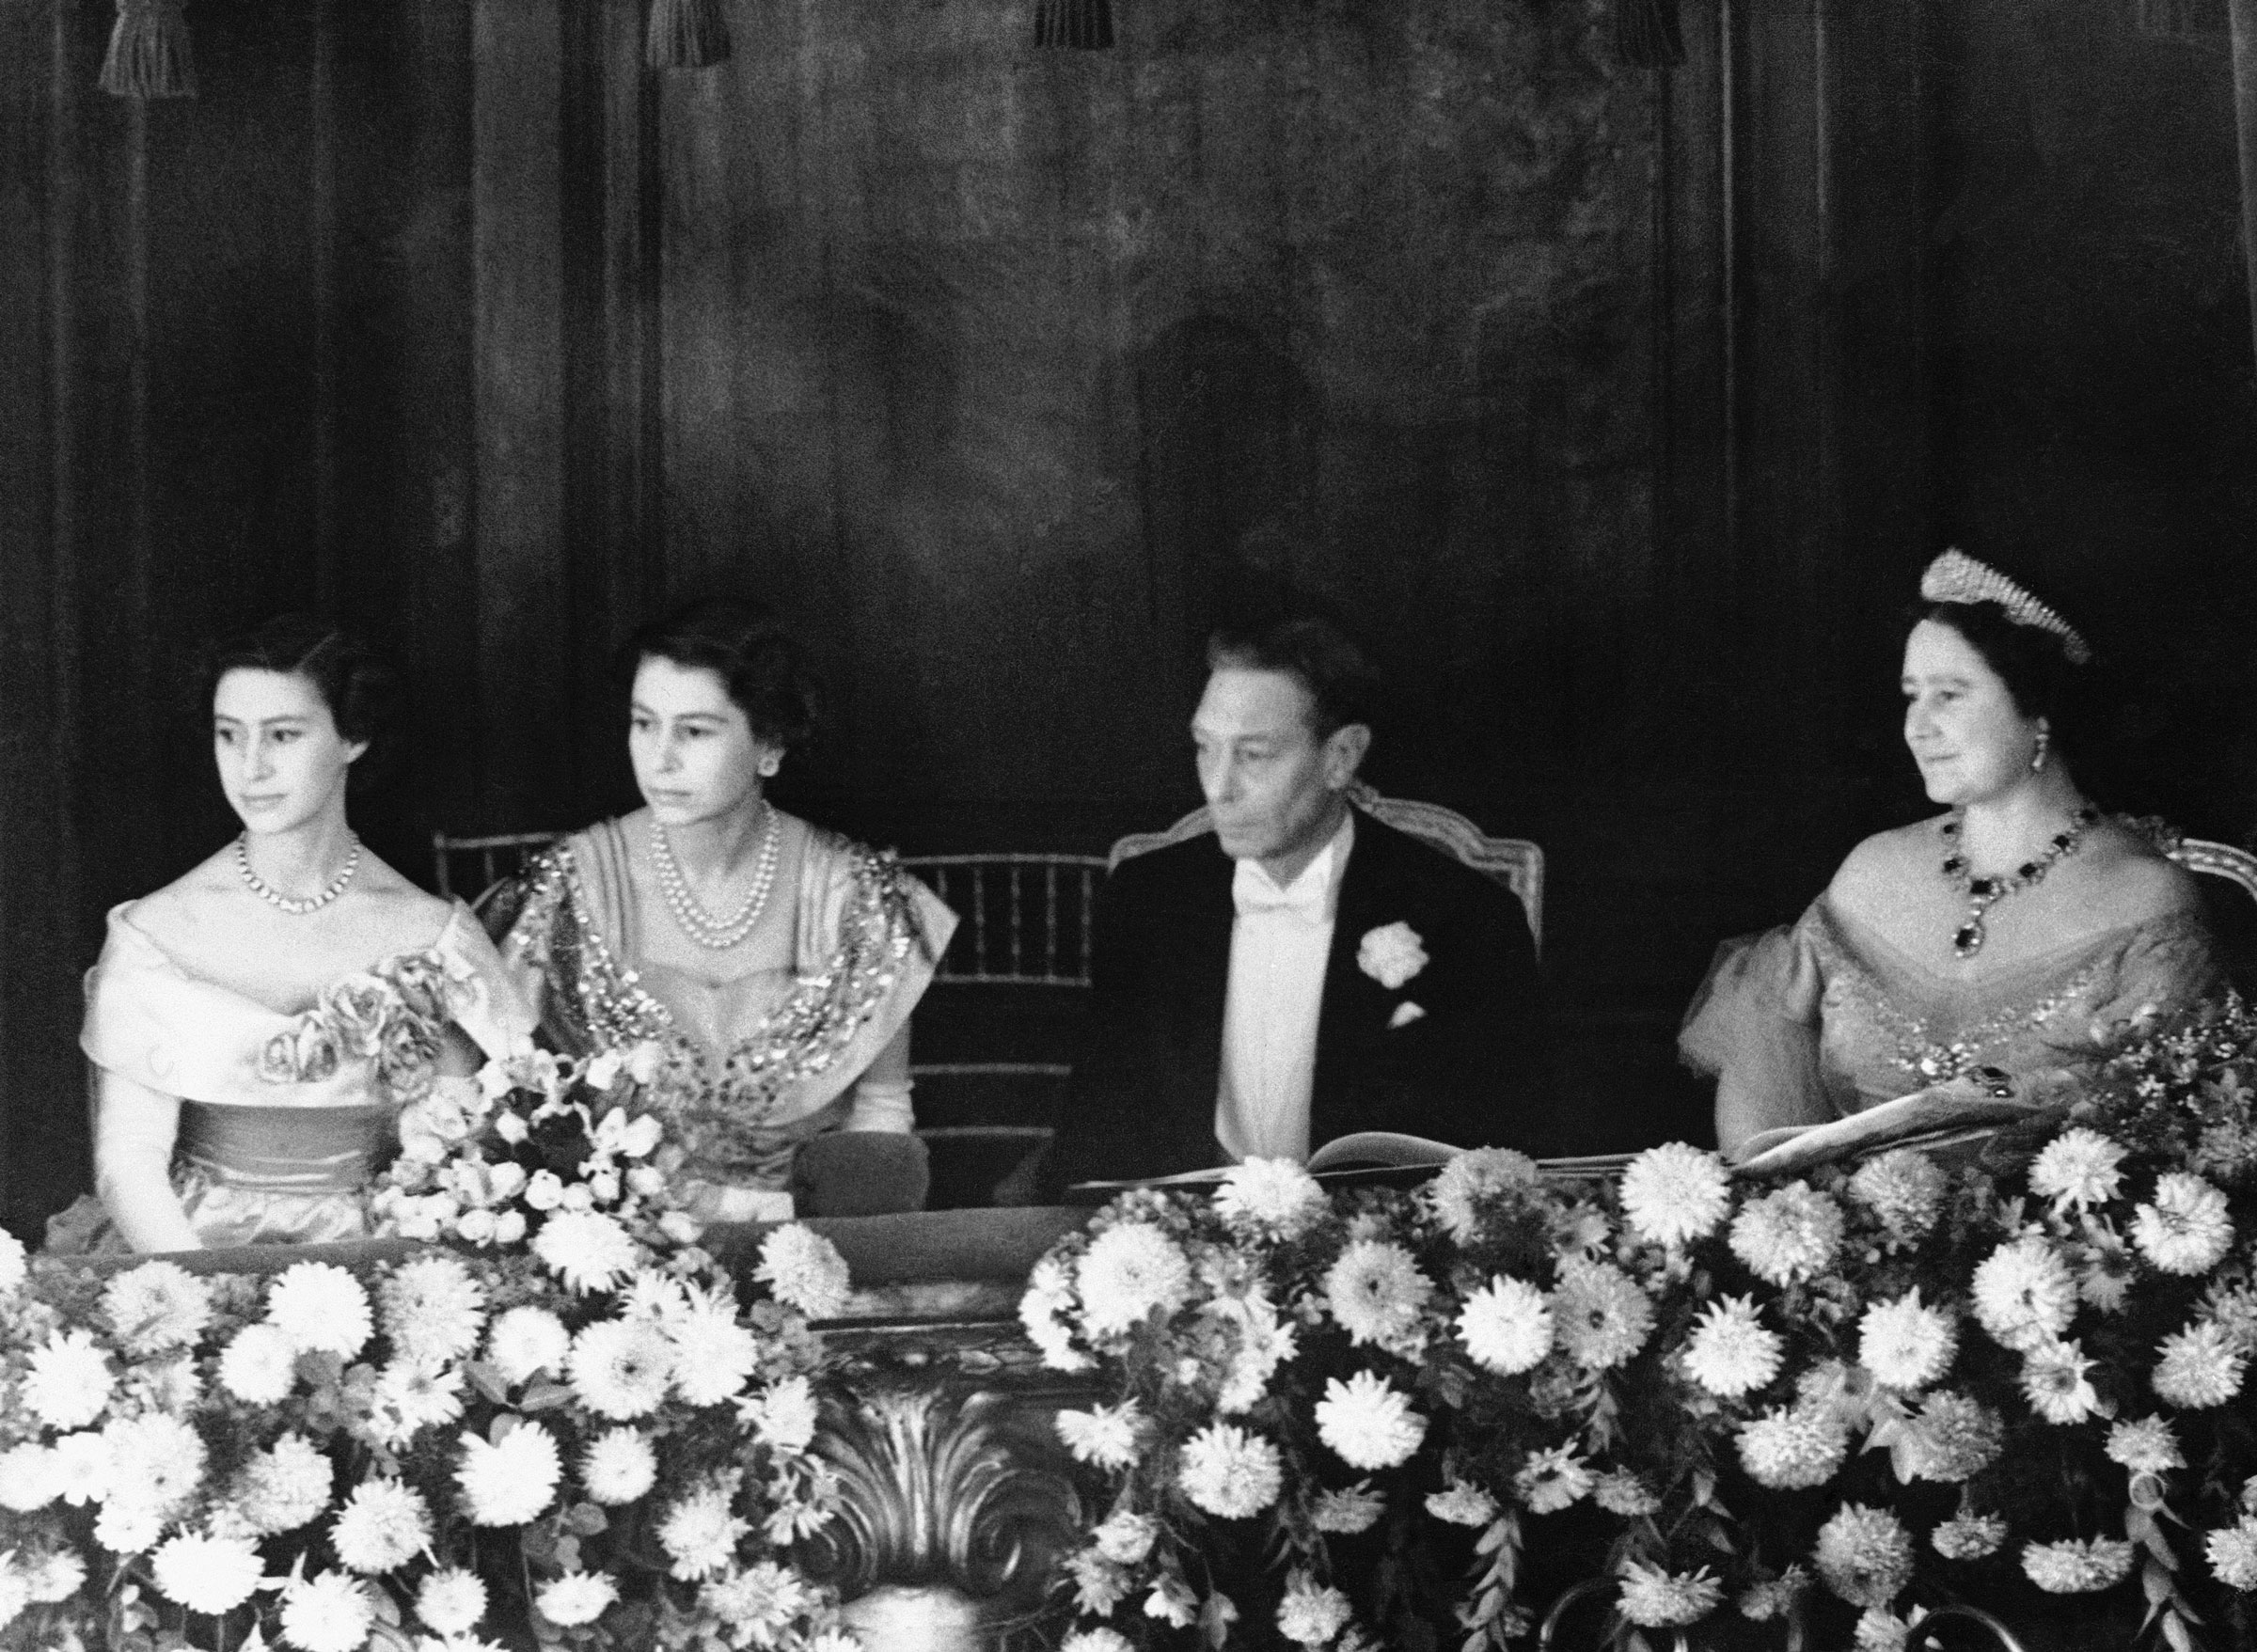 King George VI and Queen Elizabeth sit with Princesses Margaret Rose and Elizabeth in their box at the Palladium Theater in London, November 13, 1950.